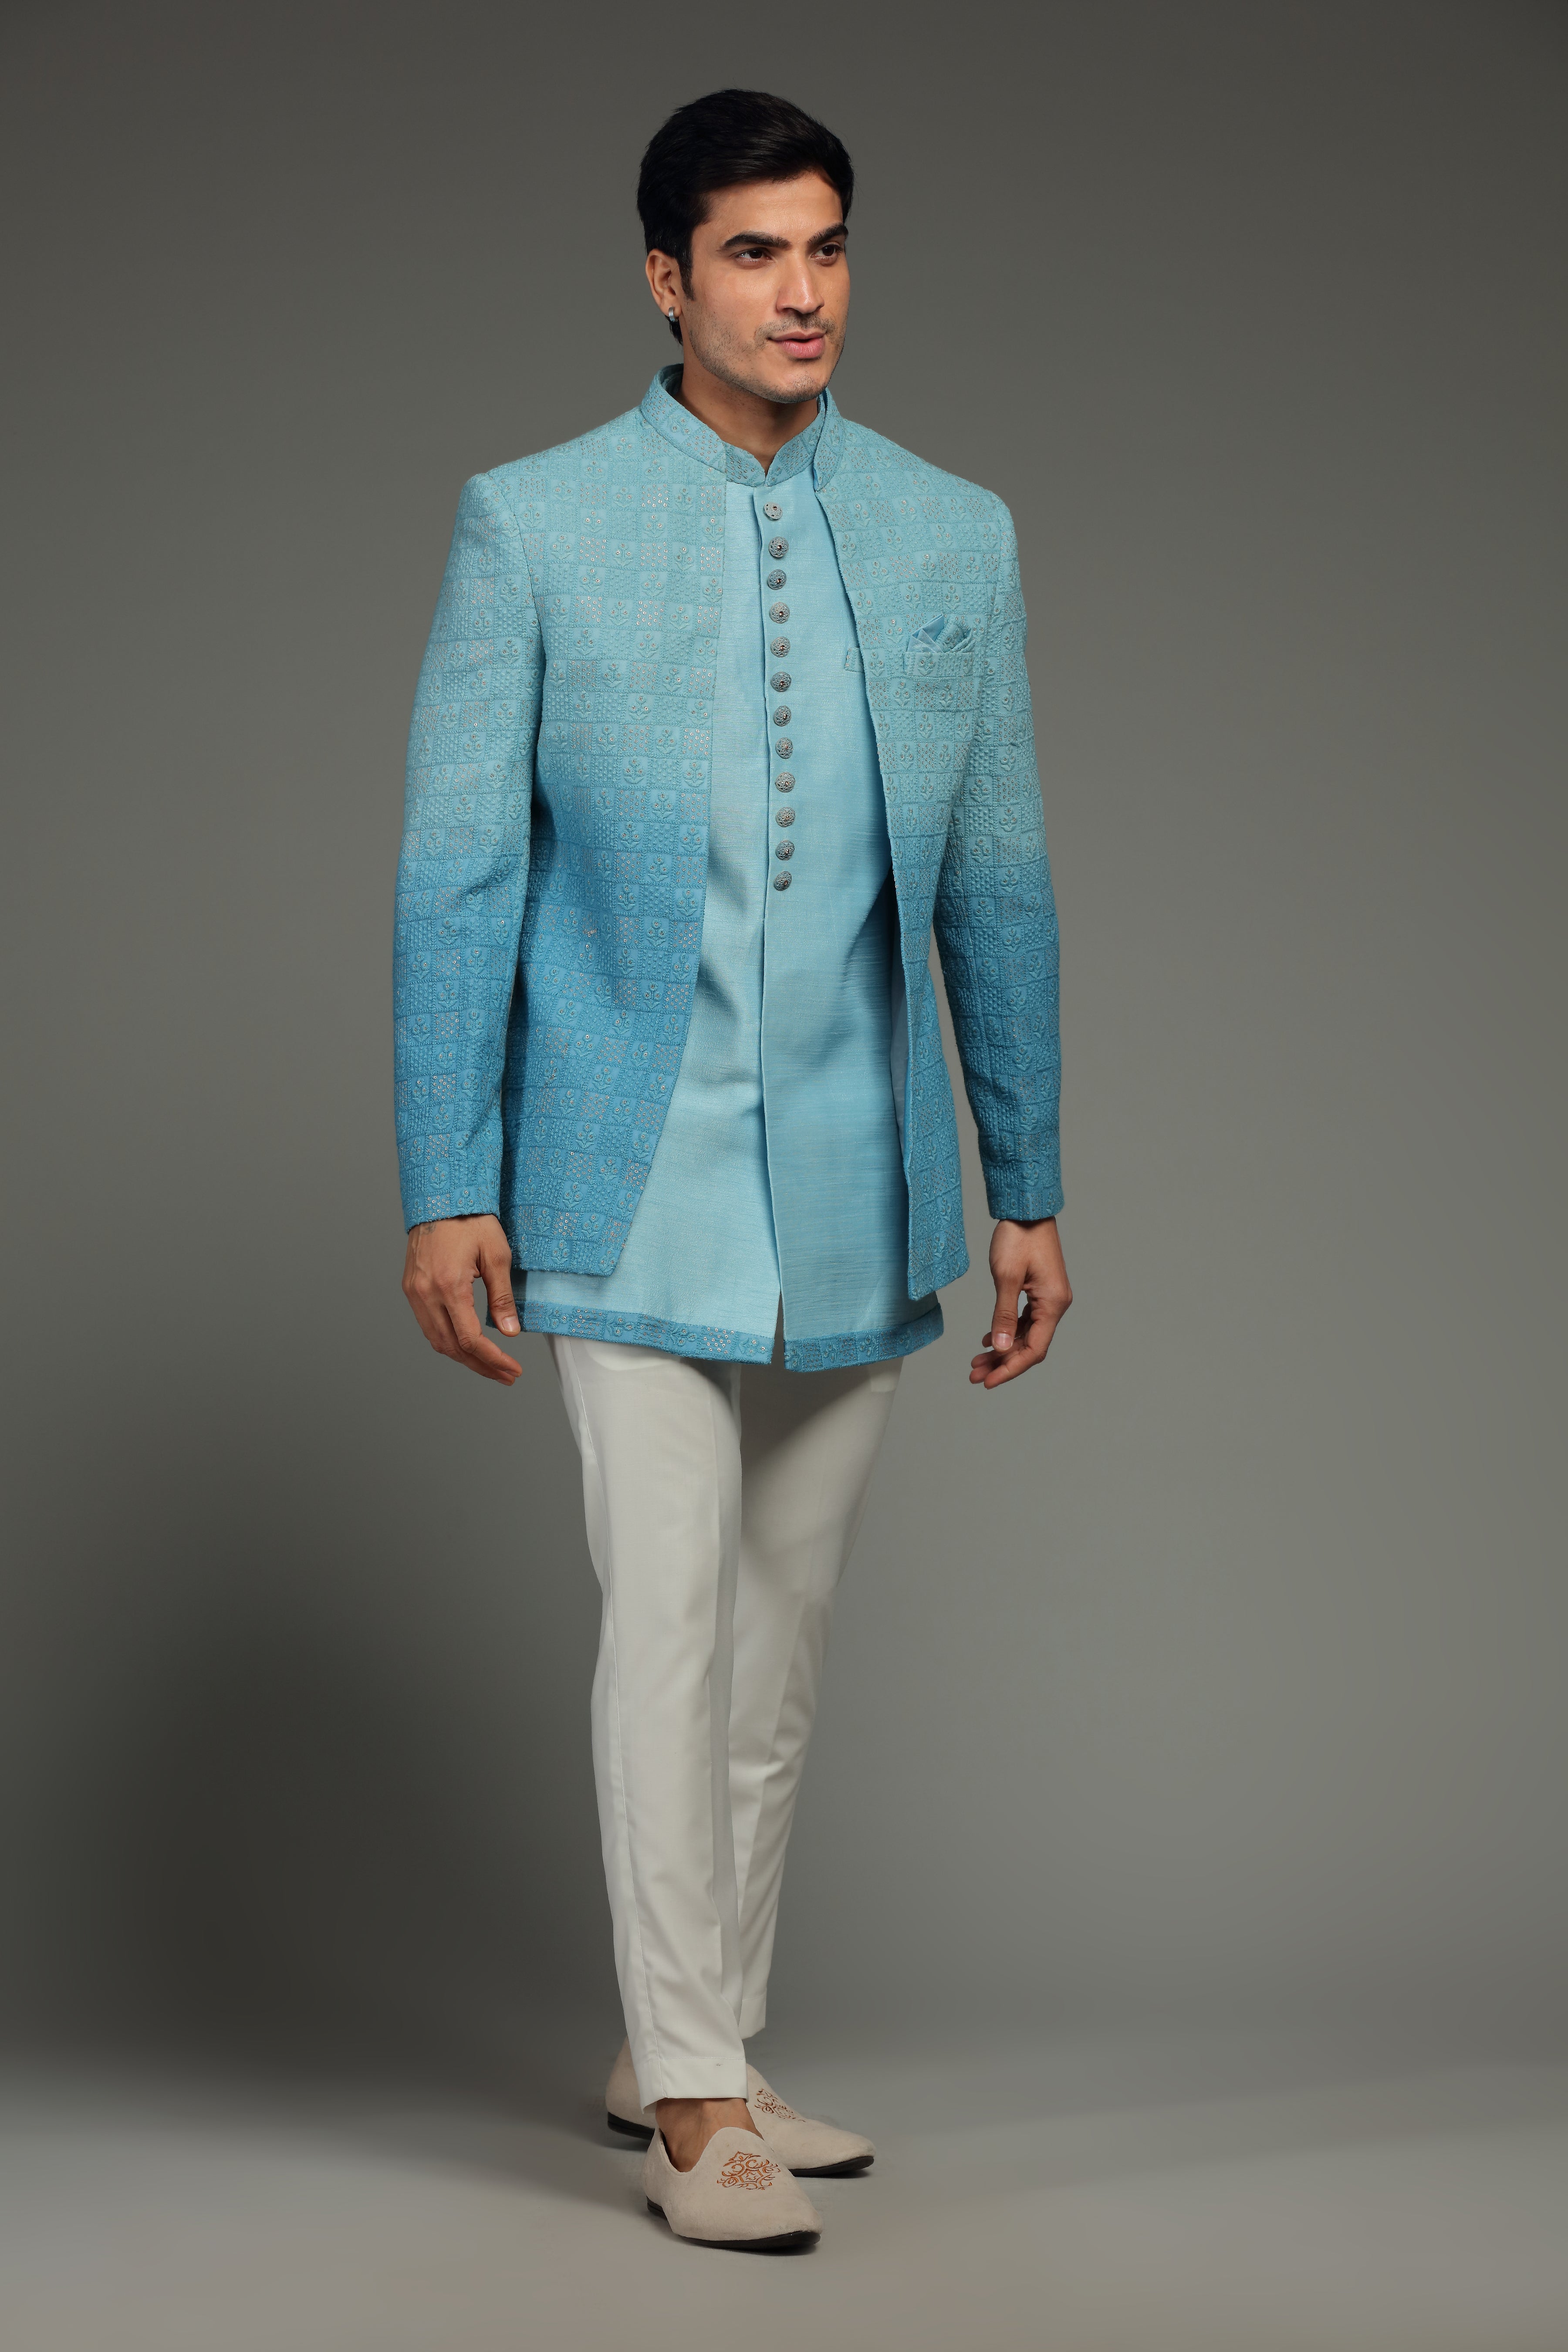 Blue Ombre Silk Jacket Set With Floral Embroidery - Shreeman